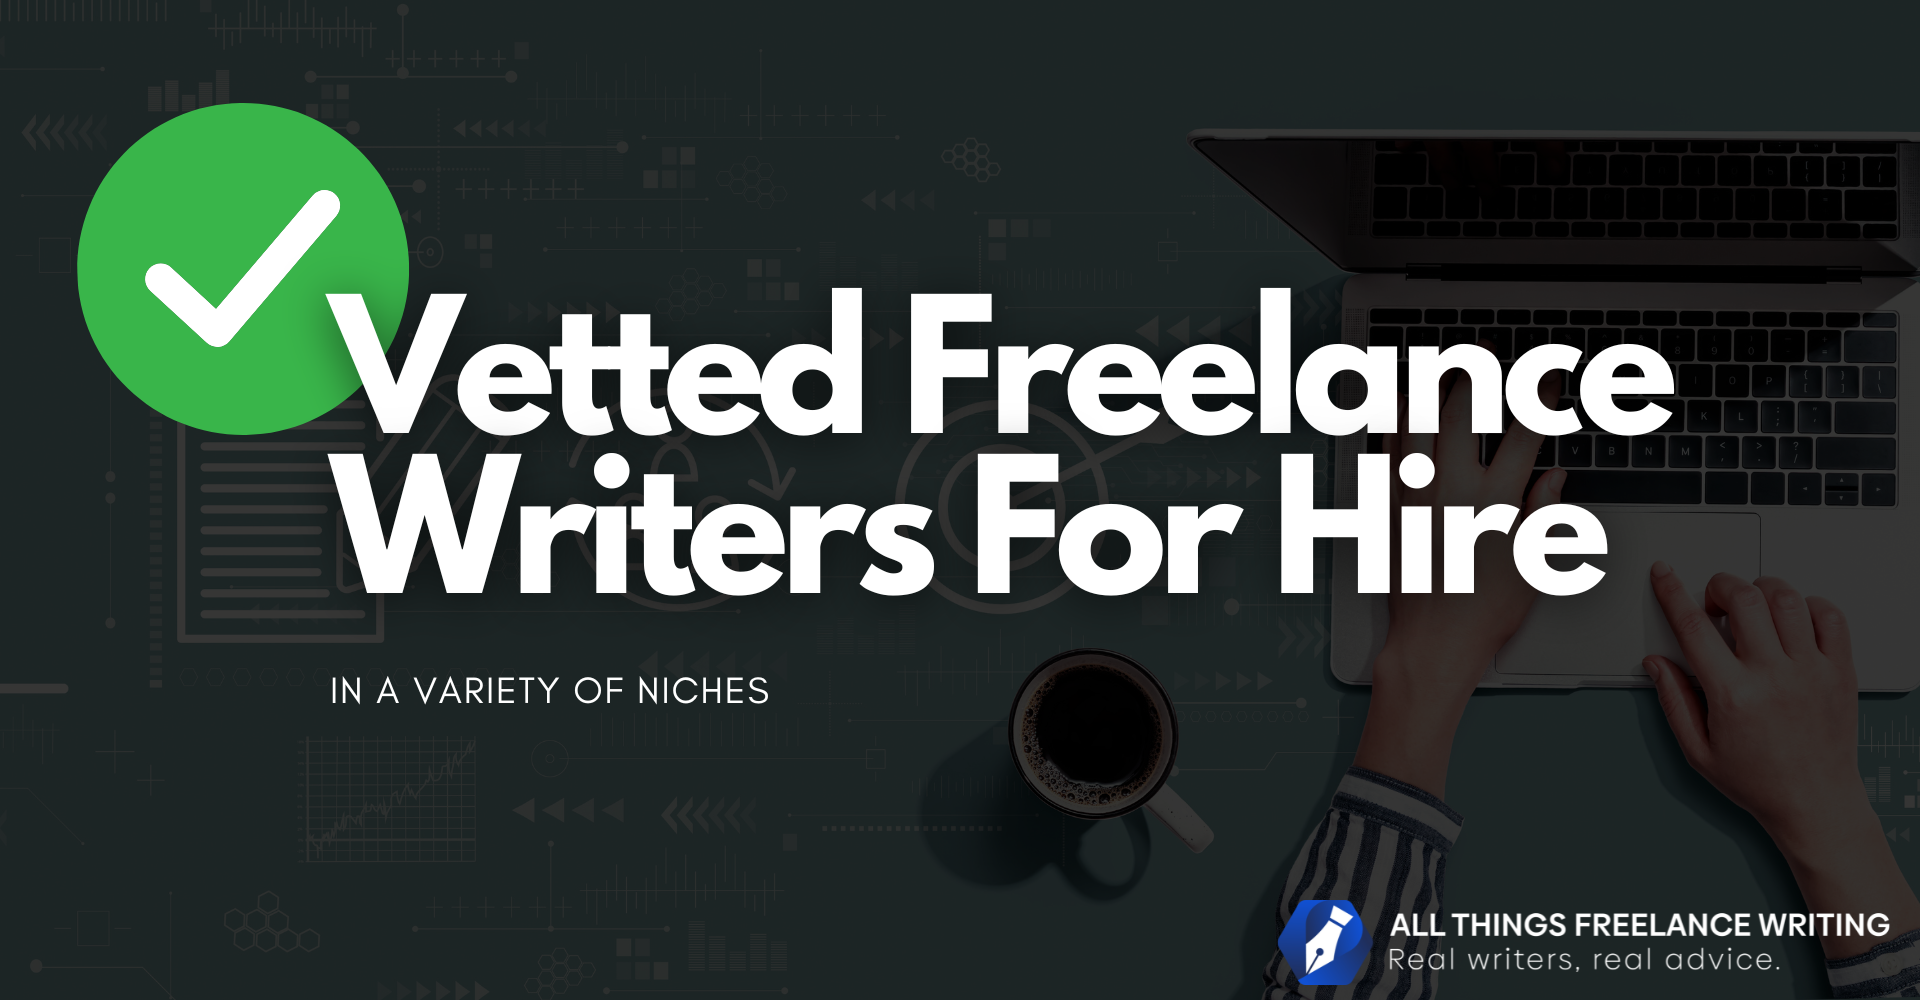 All Things Freelance Writing Vetted Freelance Writer Directory